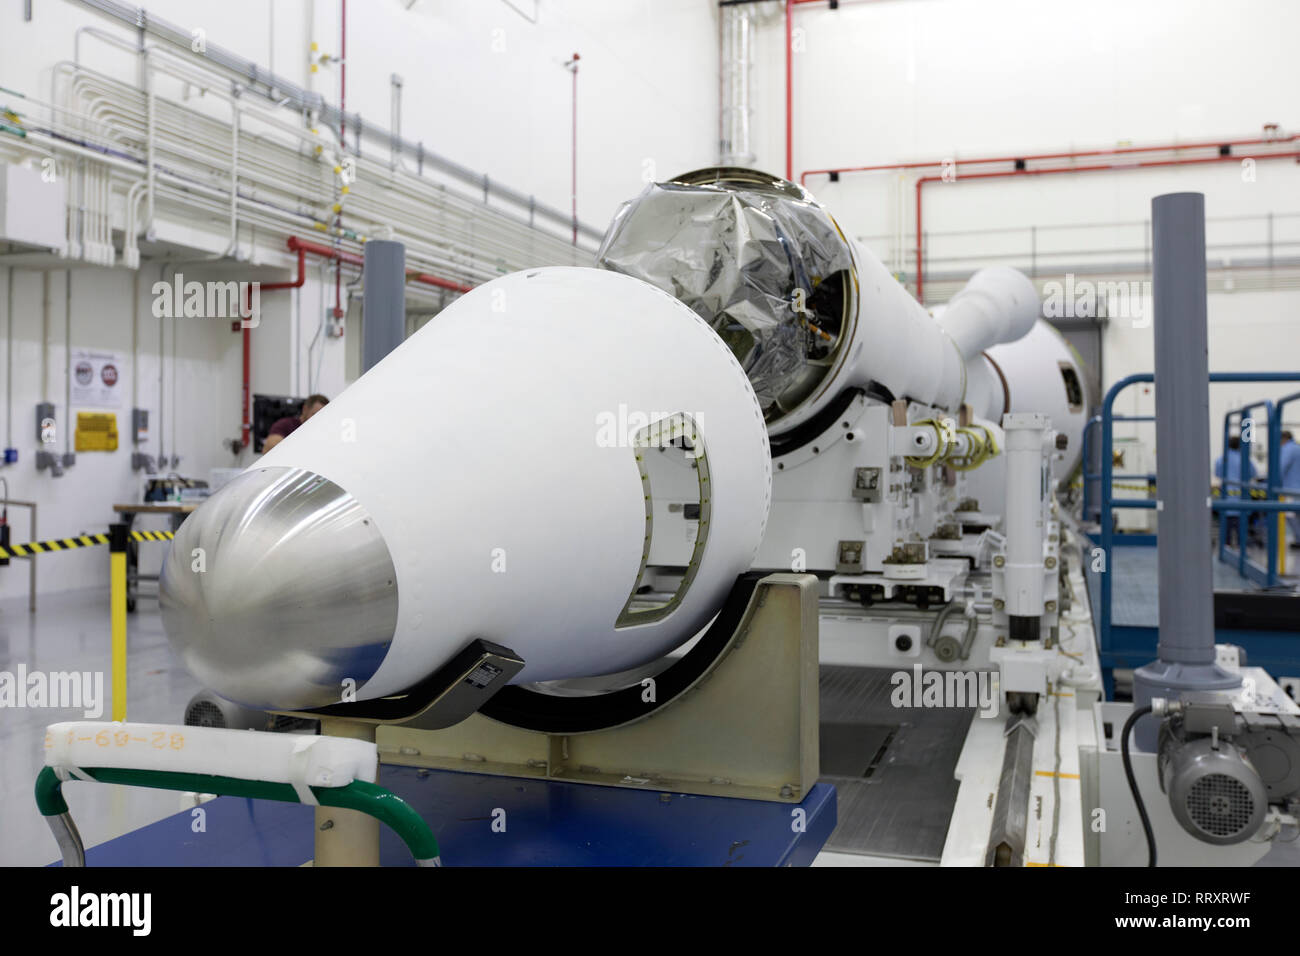 The Launch Abort System for the Orion Ascent Abort-2 Flight Test is assembled inside the Launch Abort System Facility at Kennedy Space Center February 5, 2019 in Cape Canaveral, Florida. The LAS is being prepared for a full-stress test scheduled for Spring 2019. AA-2 will launch from Space Launch Complex 46, carrying a fully functional LAS and a 22,000-pound Orion test vehicle to an altitude of 31,000 feet and traveling at more than 1,000 miles an hour. The test will verify the LAS can steer the crew module and astronauts aboard to safety. Stock Photo